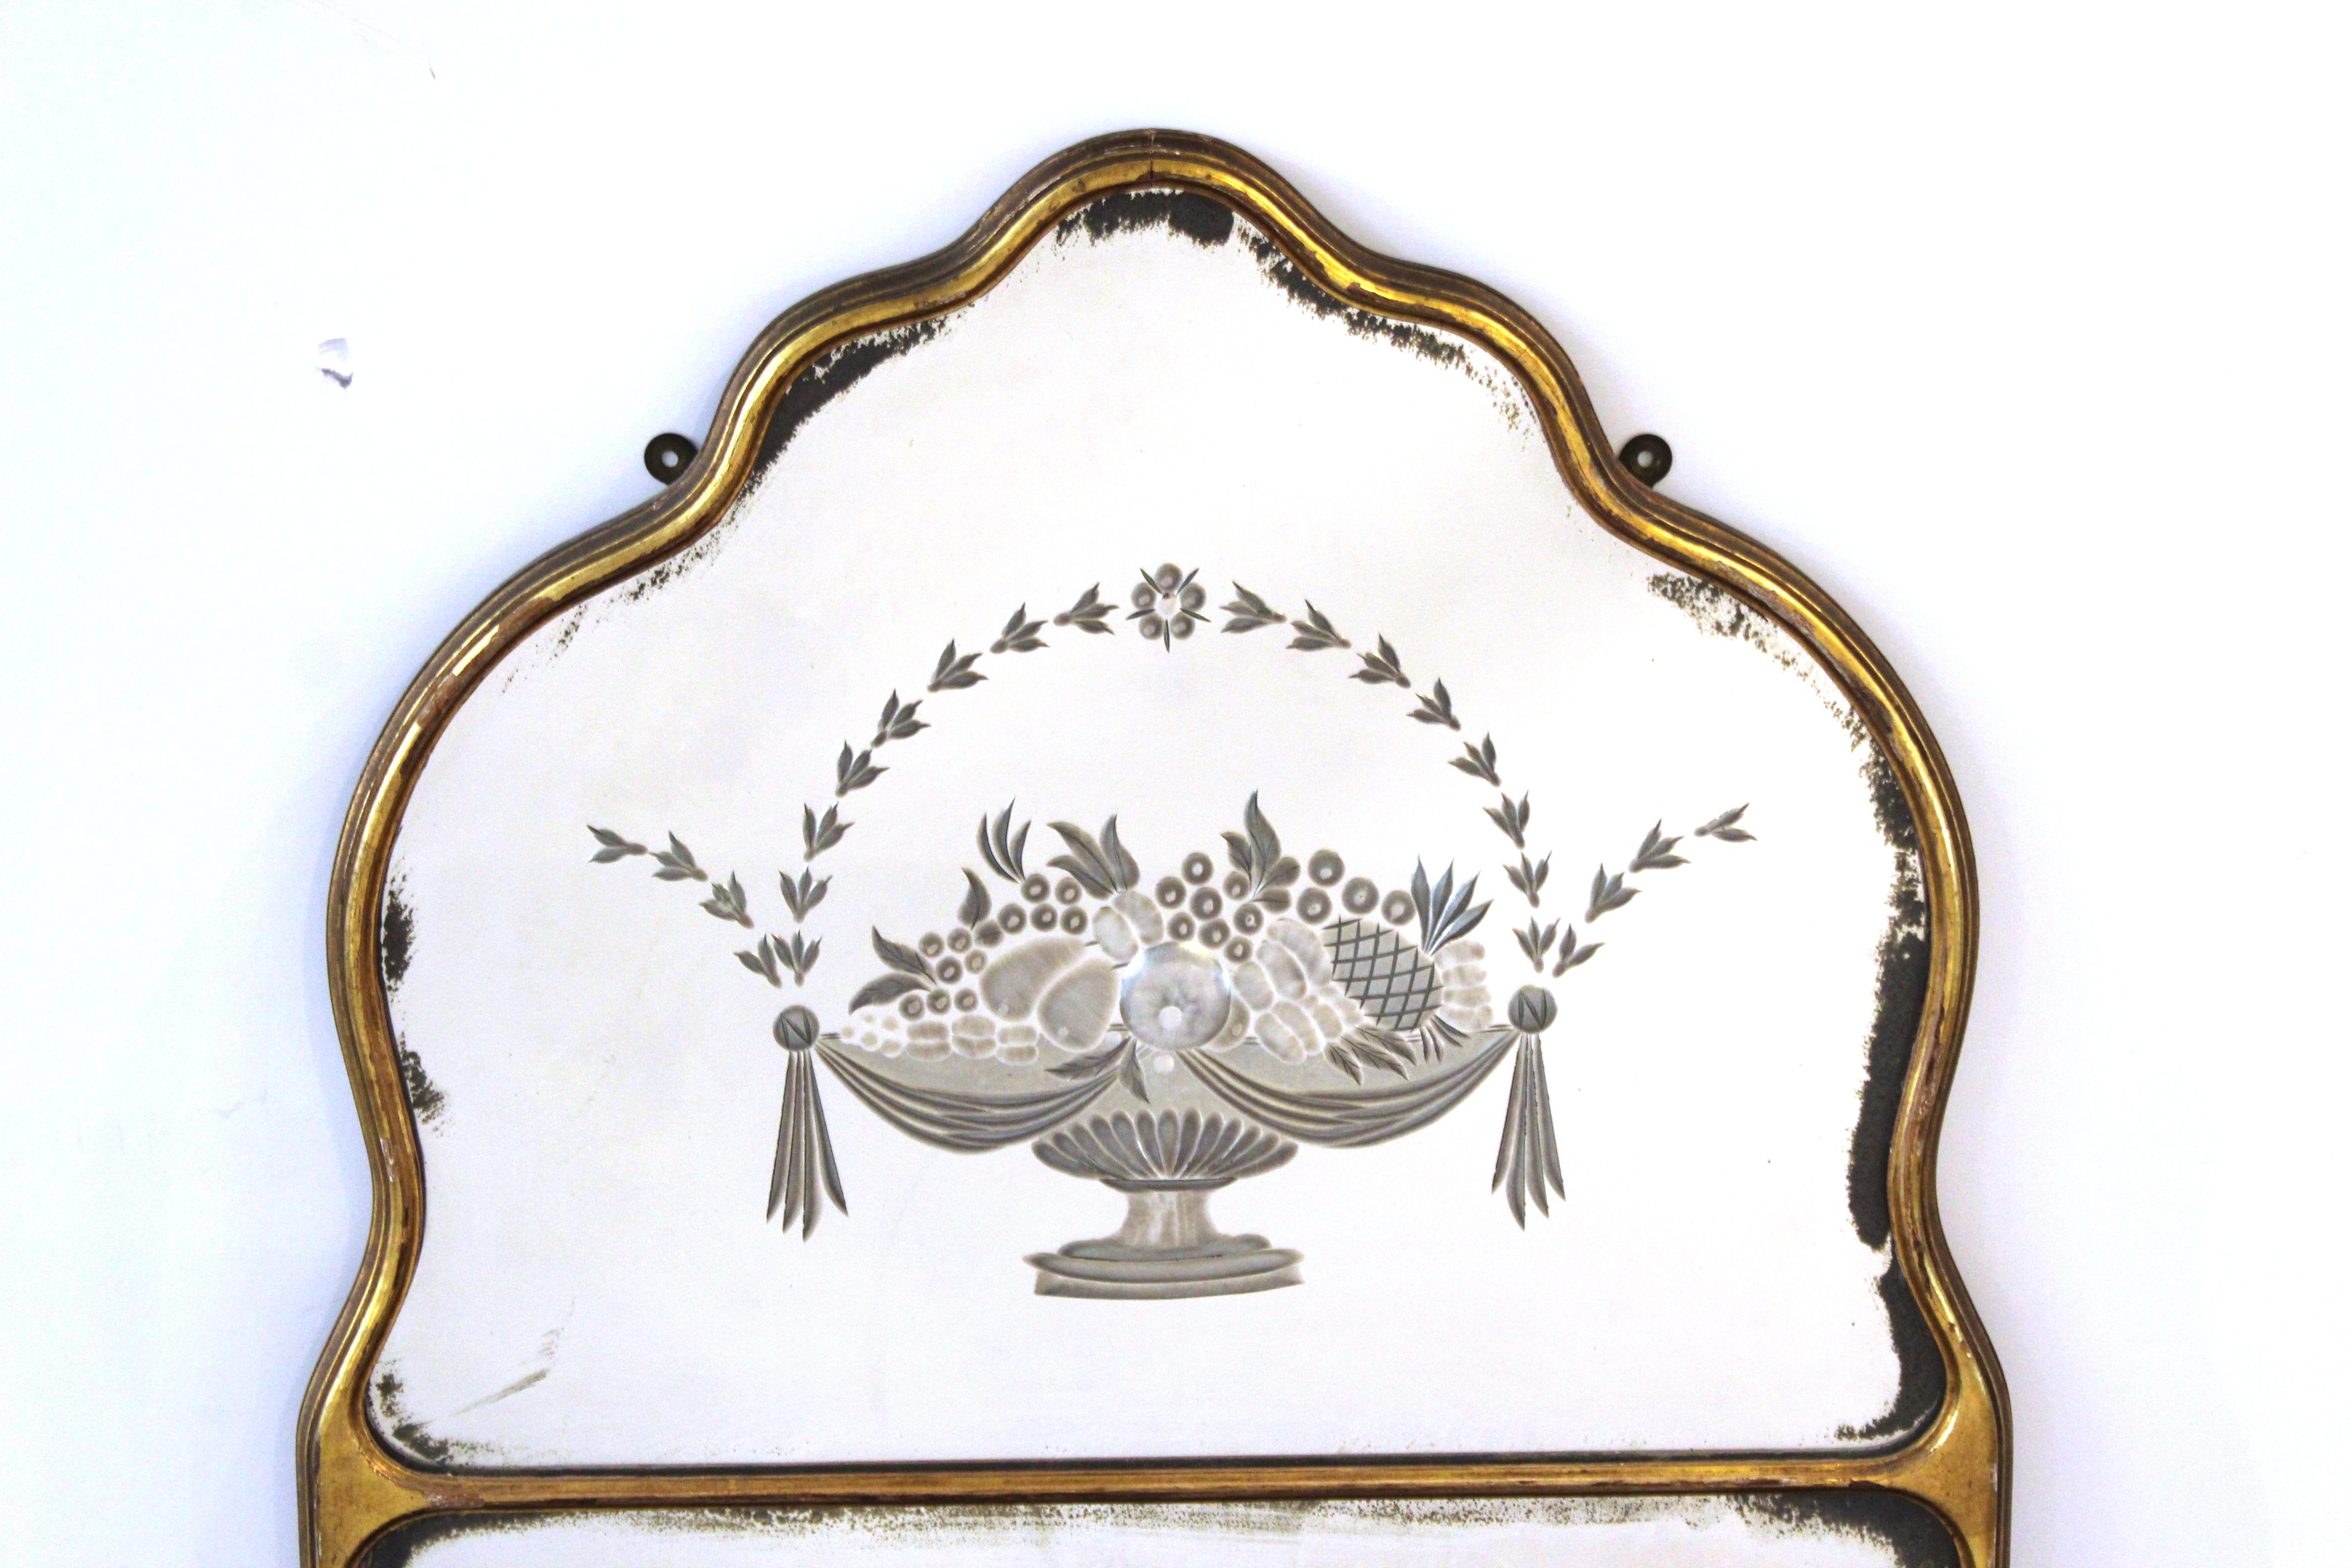 Art Deco wall mirror with gilt frame and etched decorative fruit basket in the upper section. The piece is in great vintage condition with age-appropriate wear.